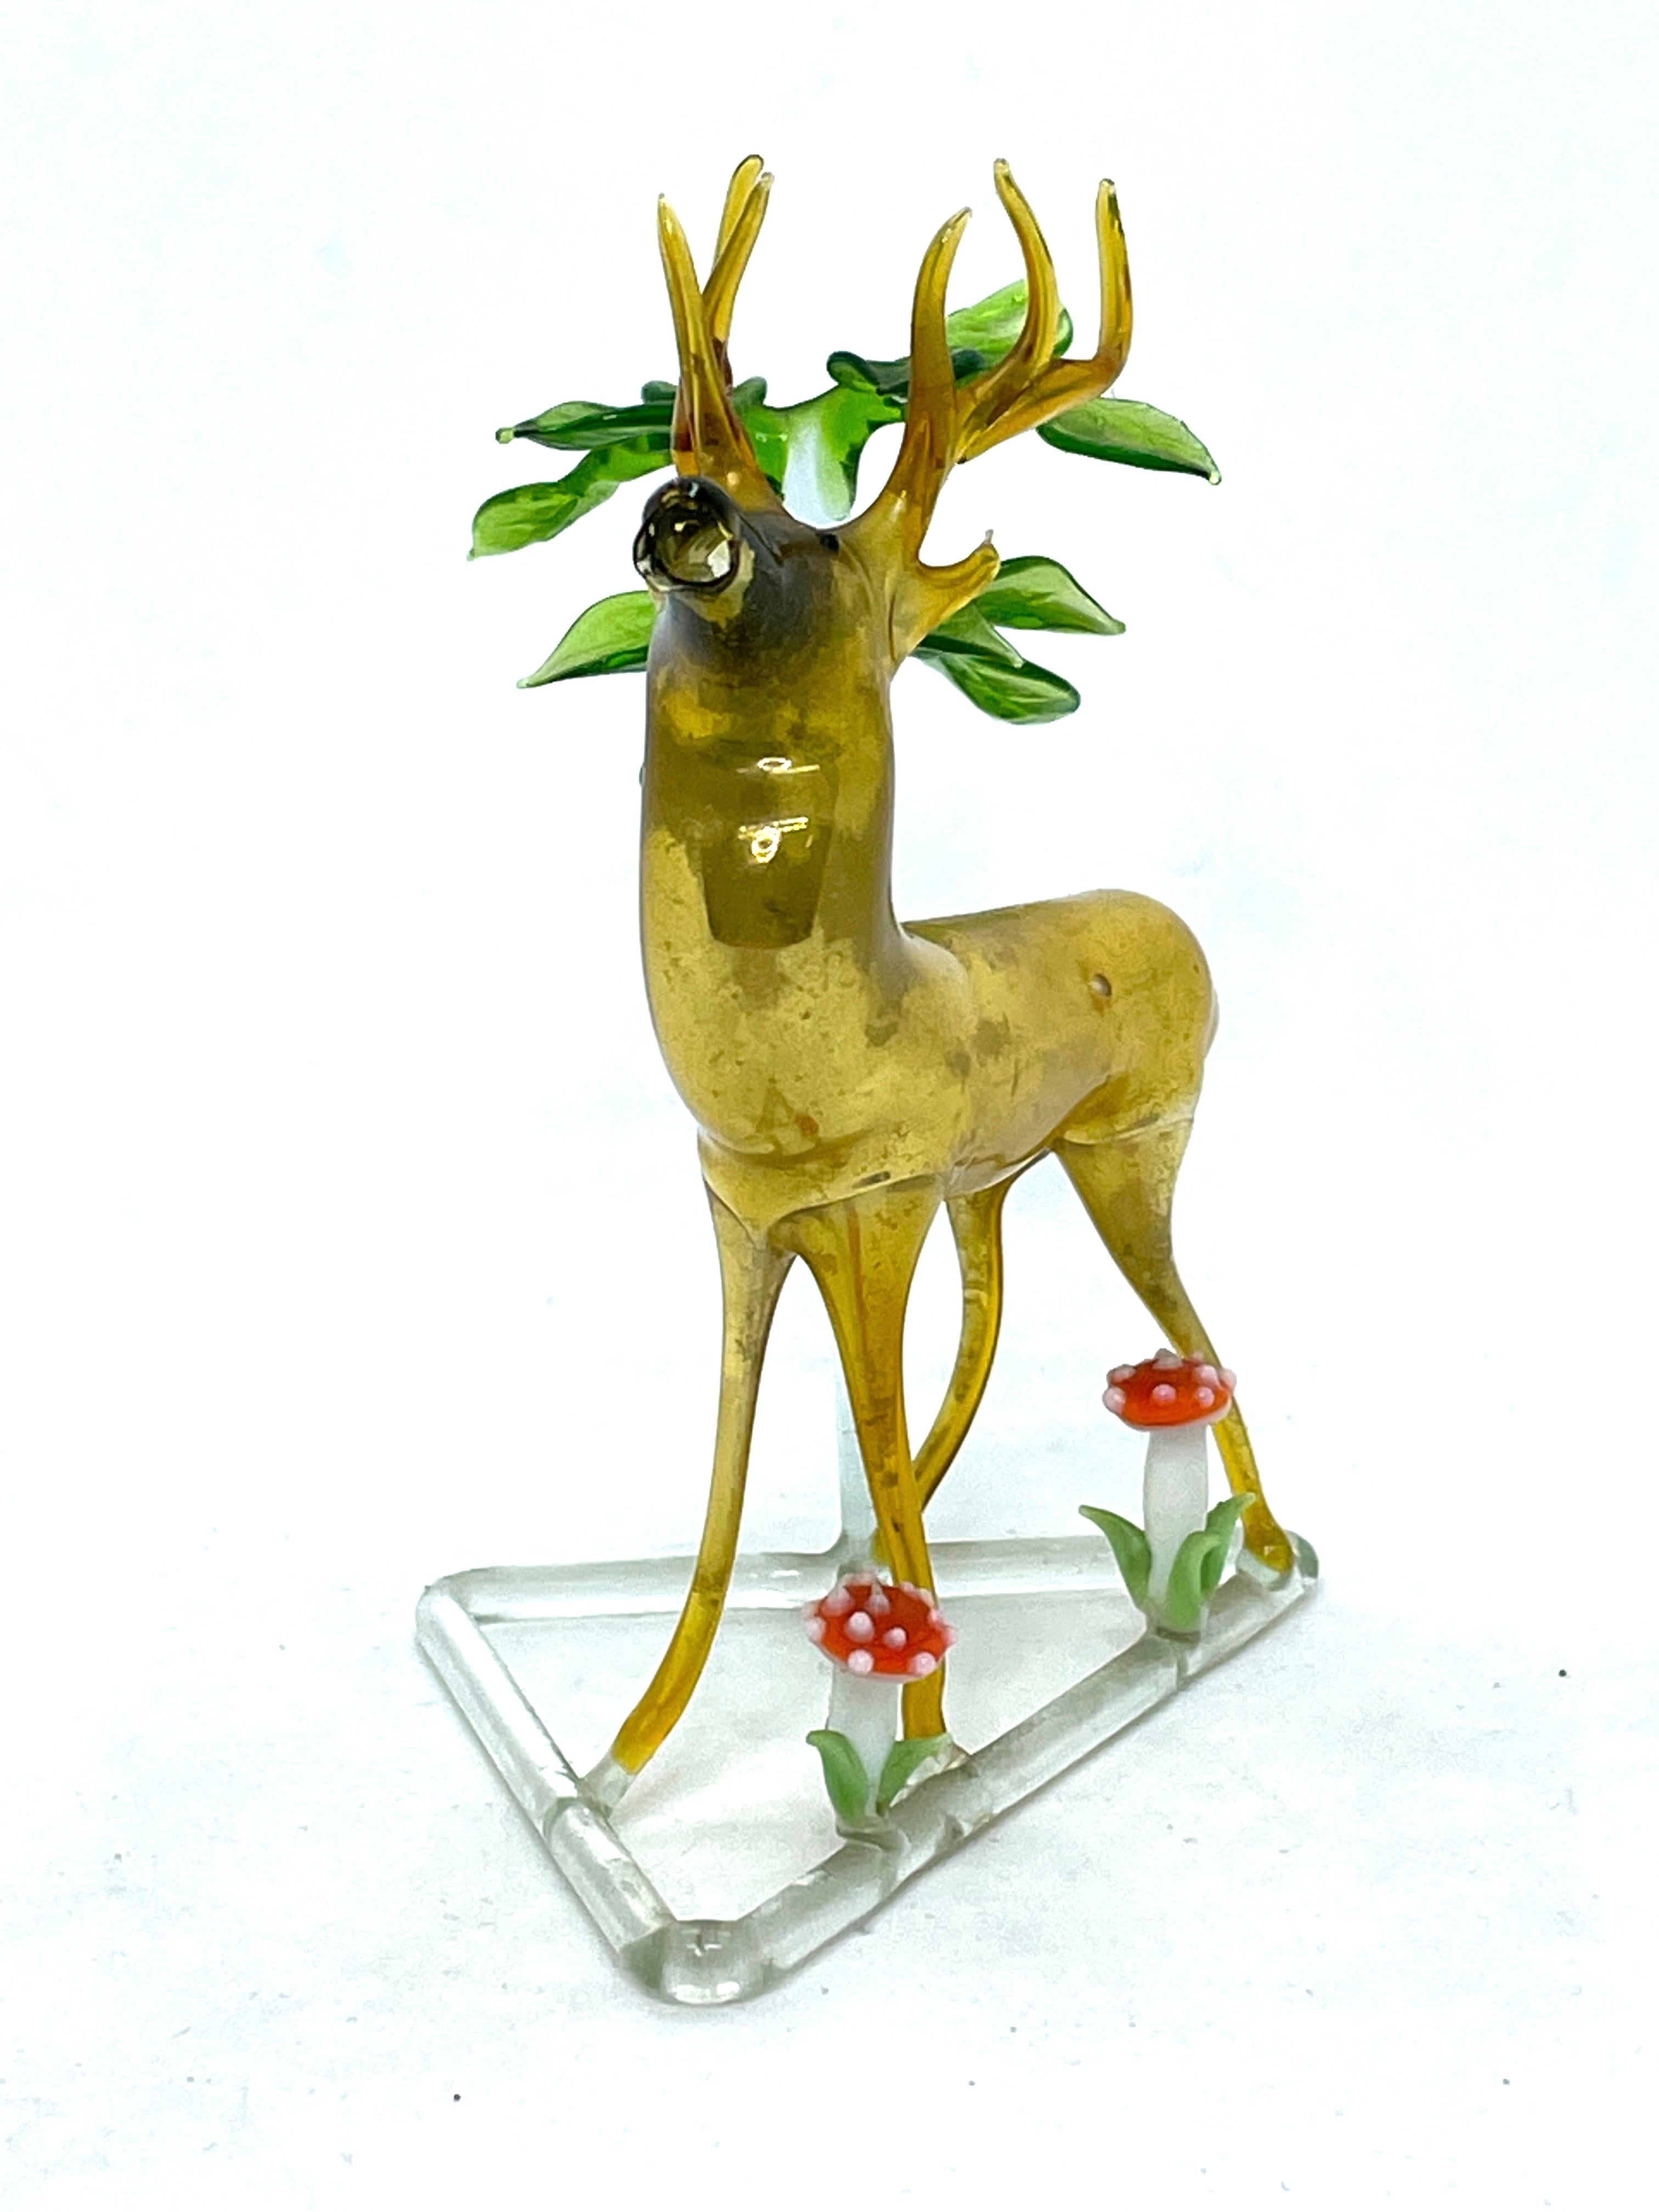 Classic early-20th century hand blown Deer Figurine, made probably in the Lauscha Thuringia Area in Germany. Excellent vintage condition, consistent with age and use. A nice addition to any collection. Found at an estate sale in Nuremberg, Germany.